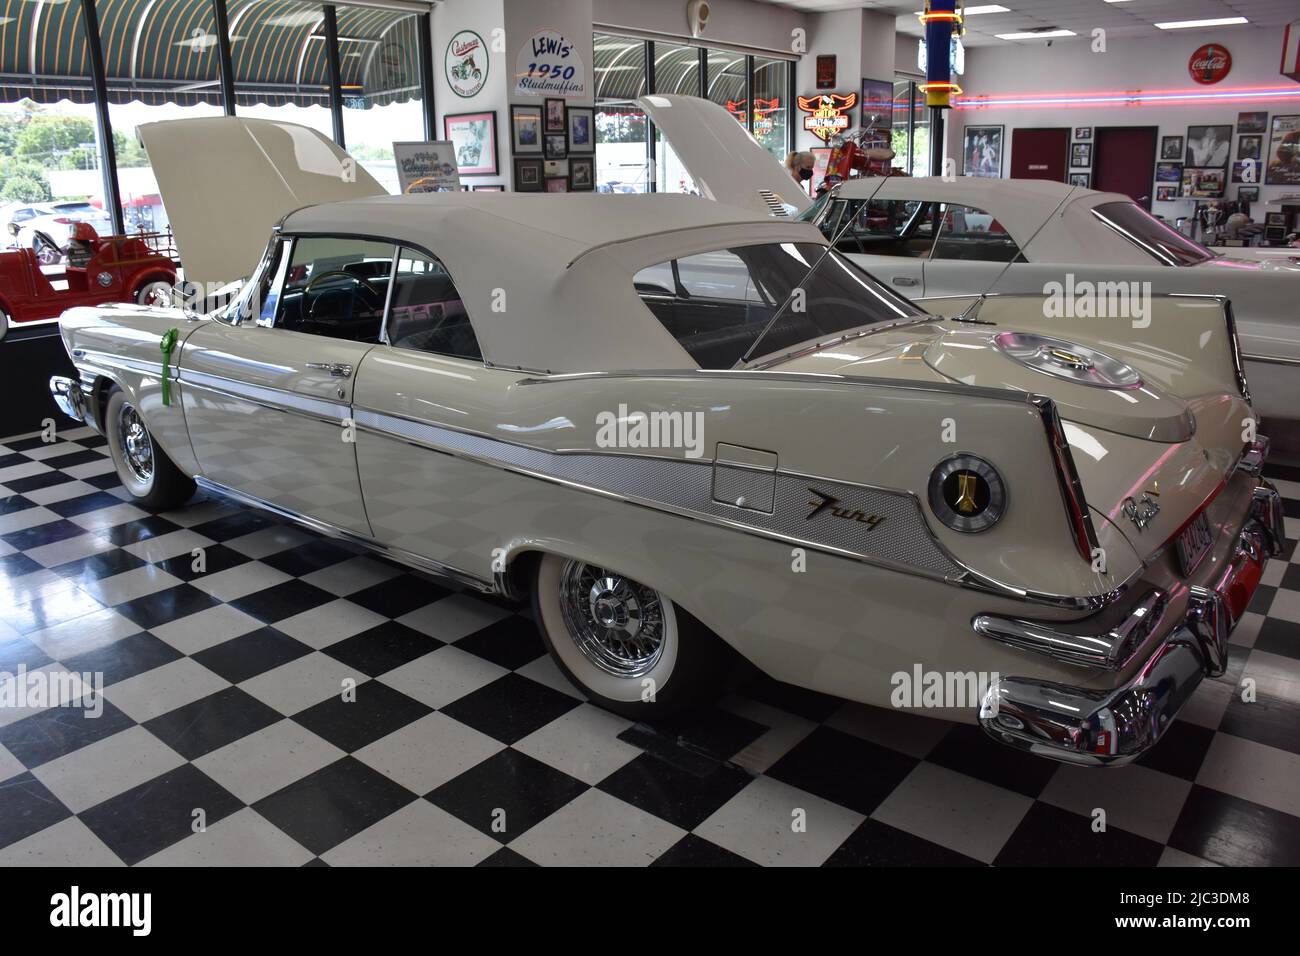 A 1959 Plymouth Fury on display at the Benson Car Museum. Stock Photo